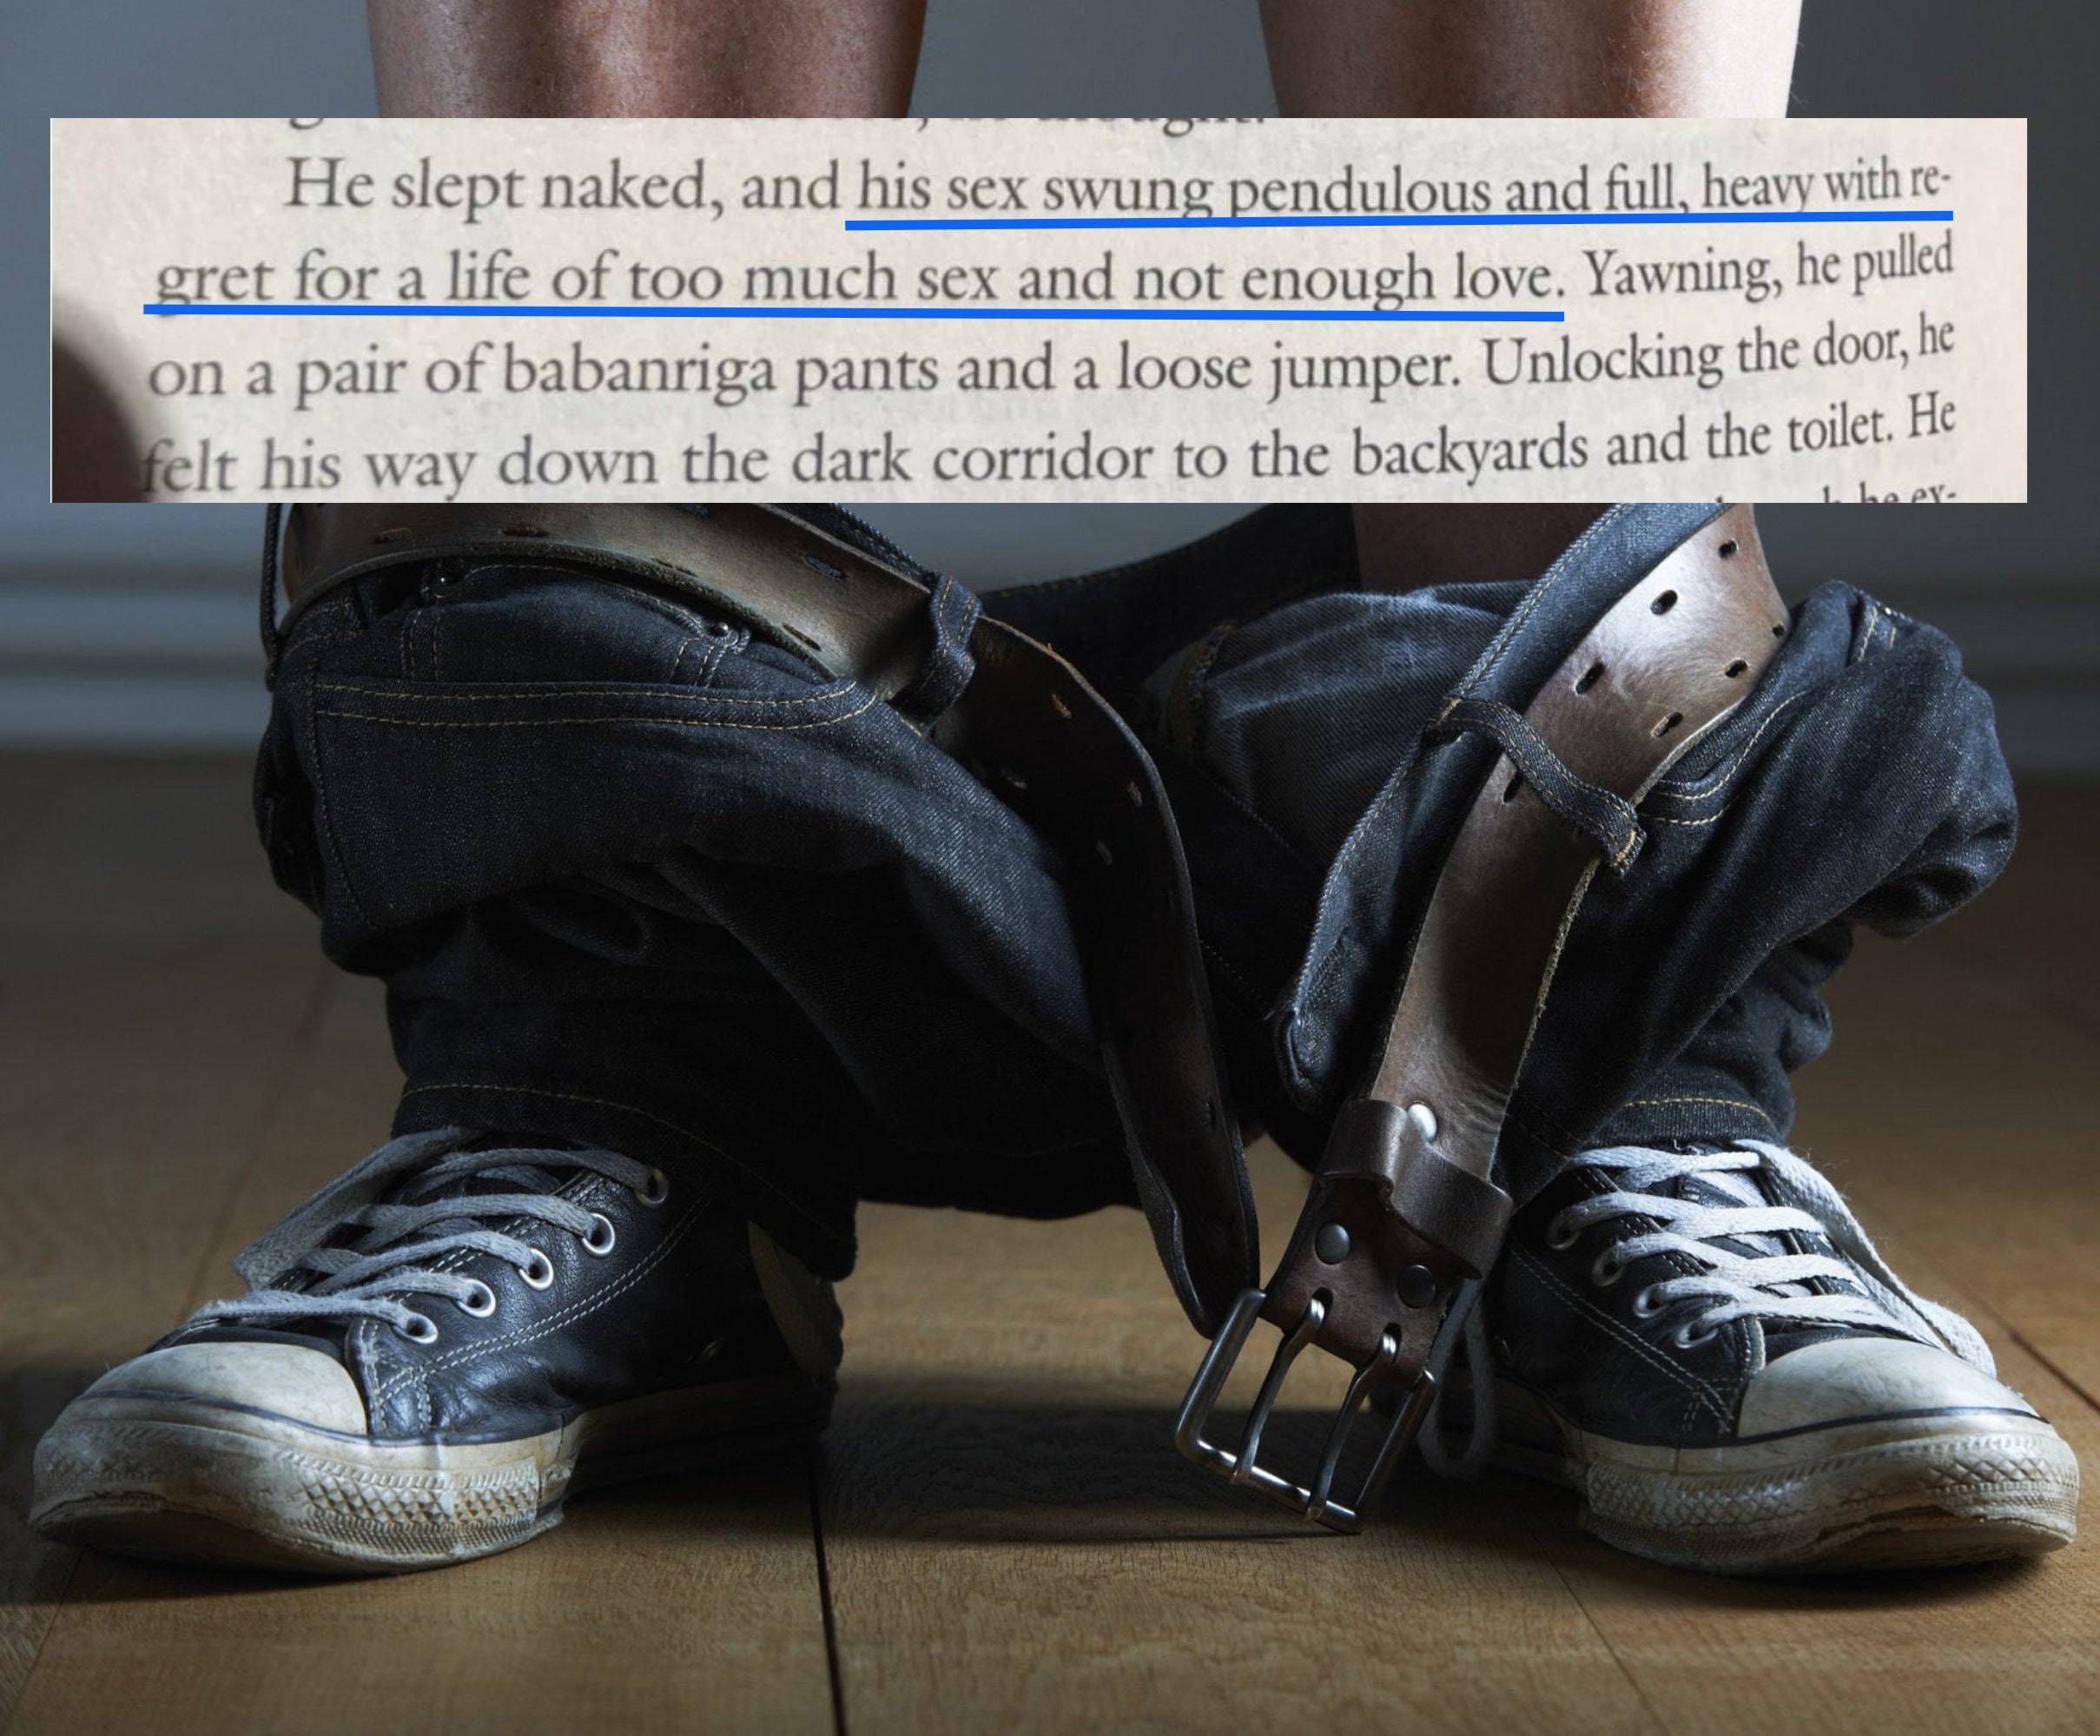 person with shoes and their pants down to ankles (insert) book excerpt